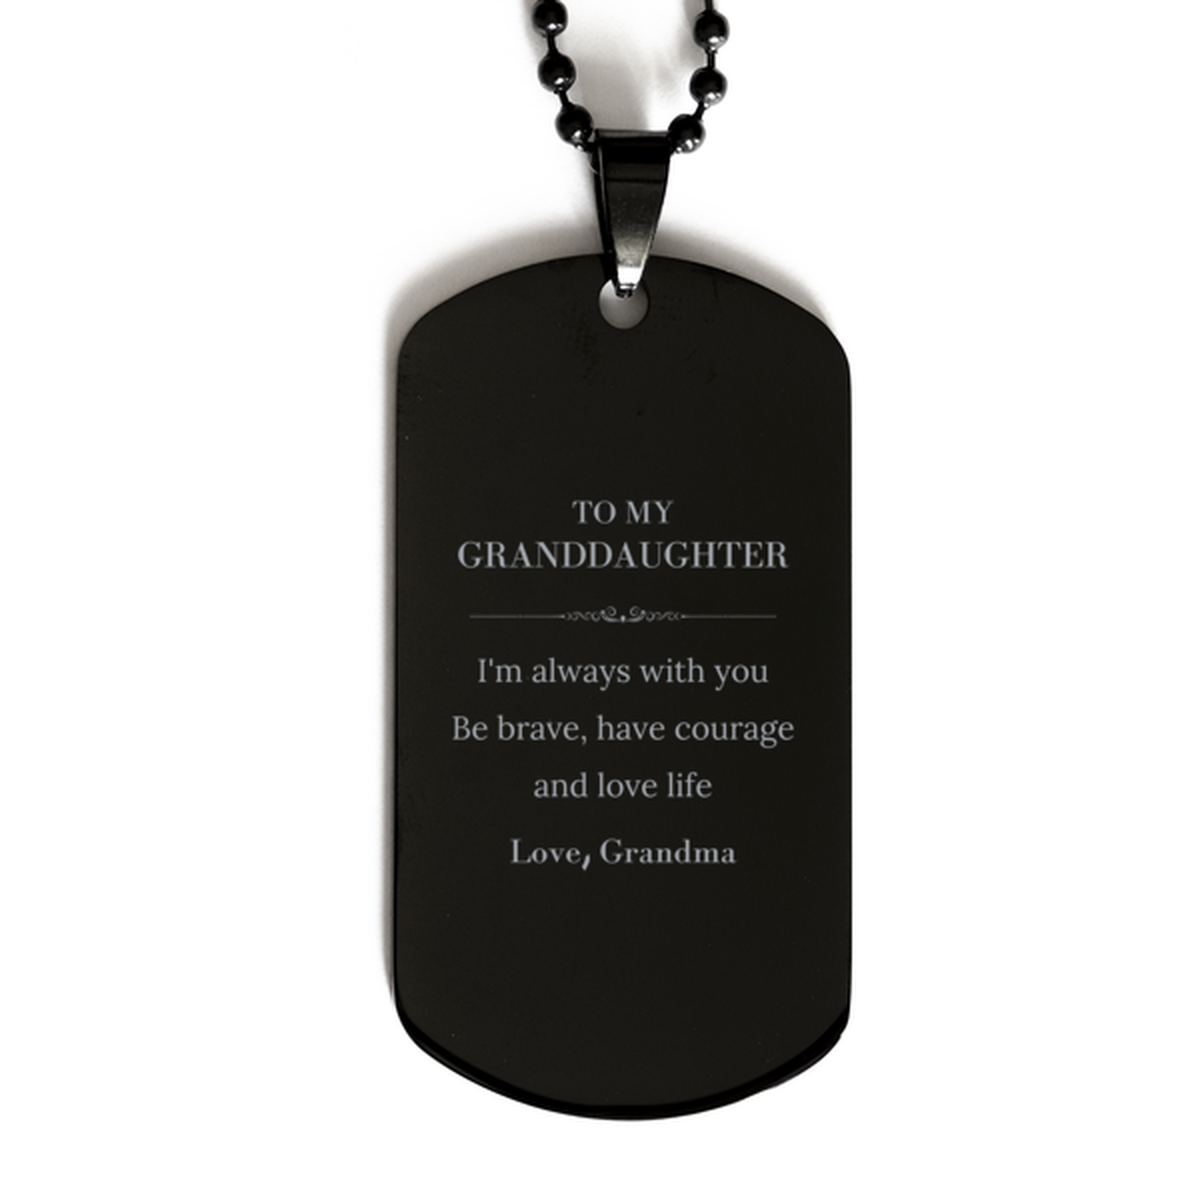 To My Granddaughter Gifts from Grandma, Unique Black Dog Tag Inspirational Christmas Birthday Graduation Gifts for Granddaughter I'm always with you. Be brave, have courage and love life. Love, Grandma